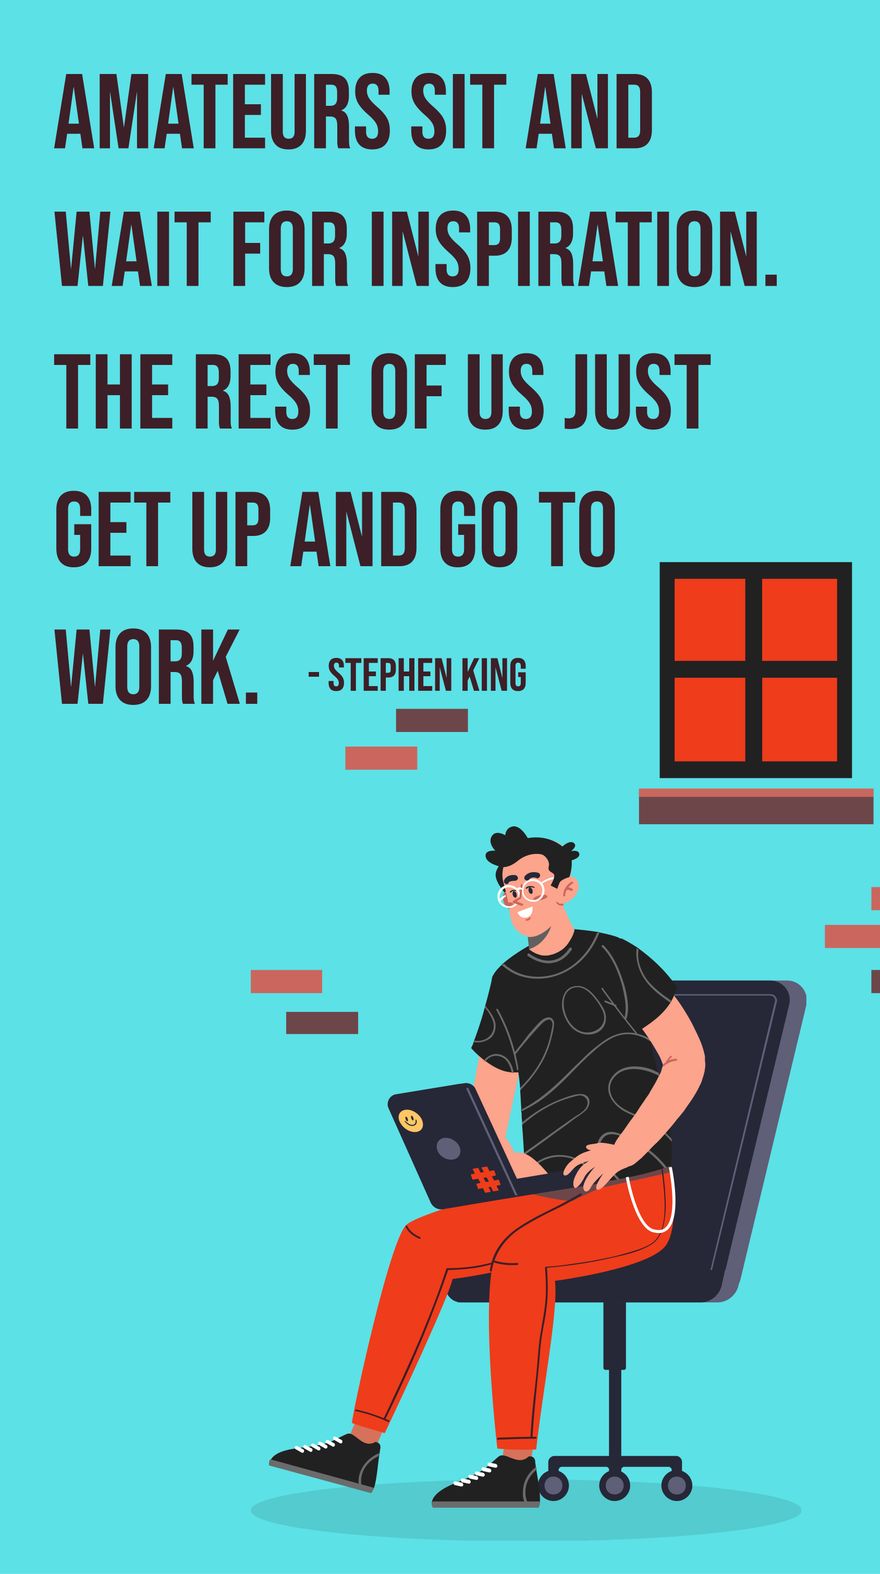 Stephen King - Amateurs sit and wait for inspiration. The rest of us just get up and go to work.